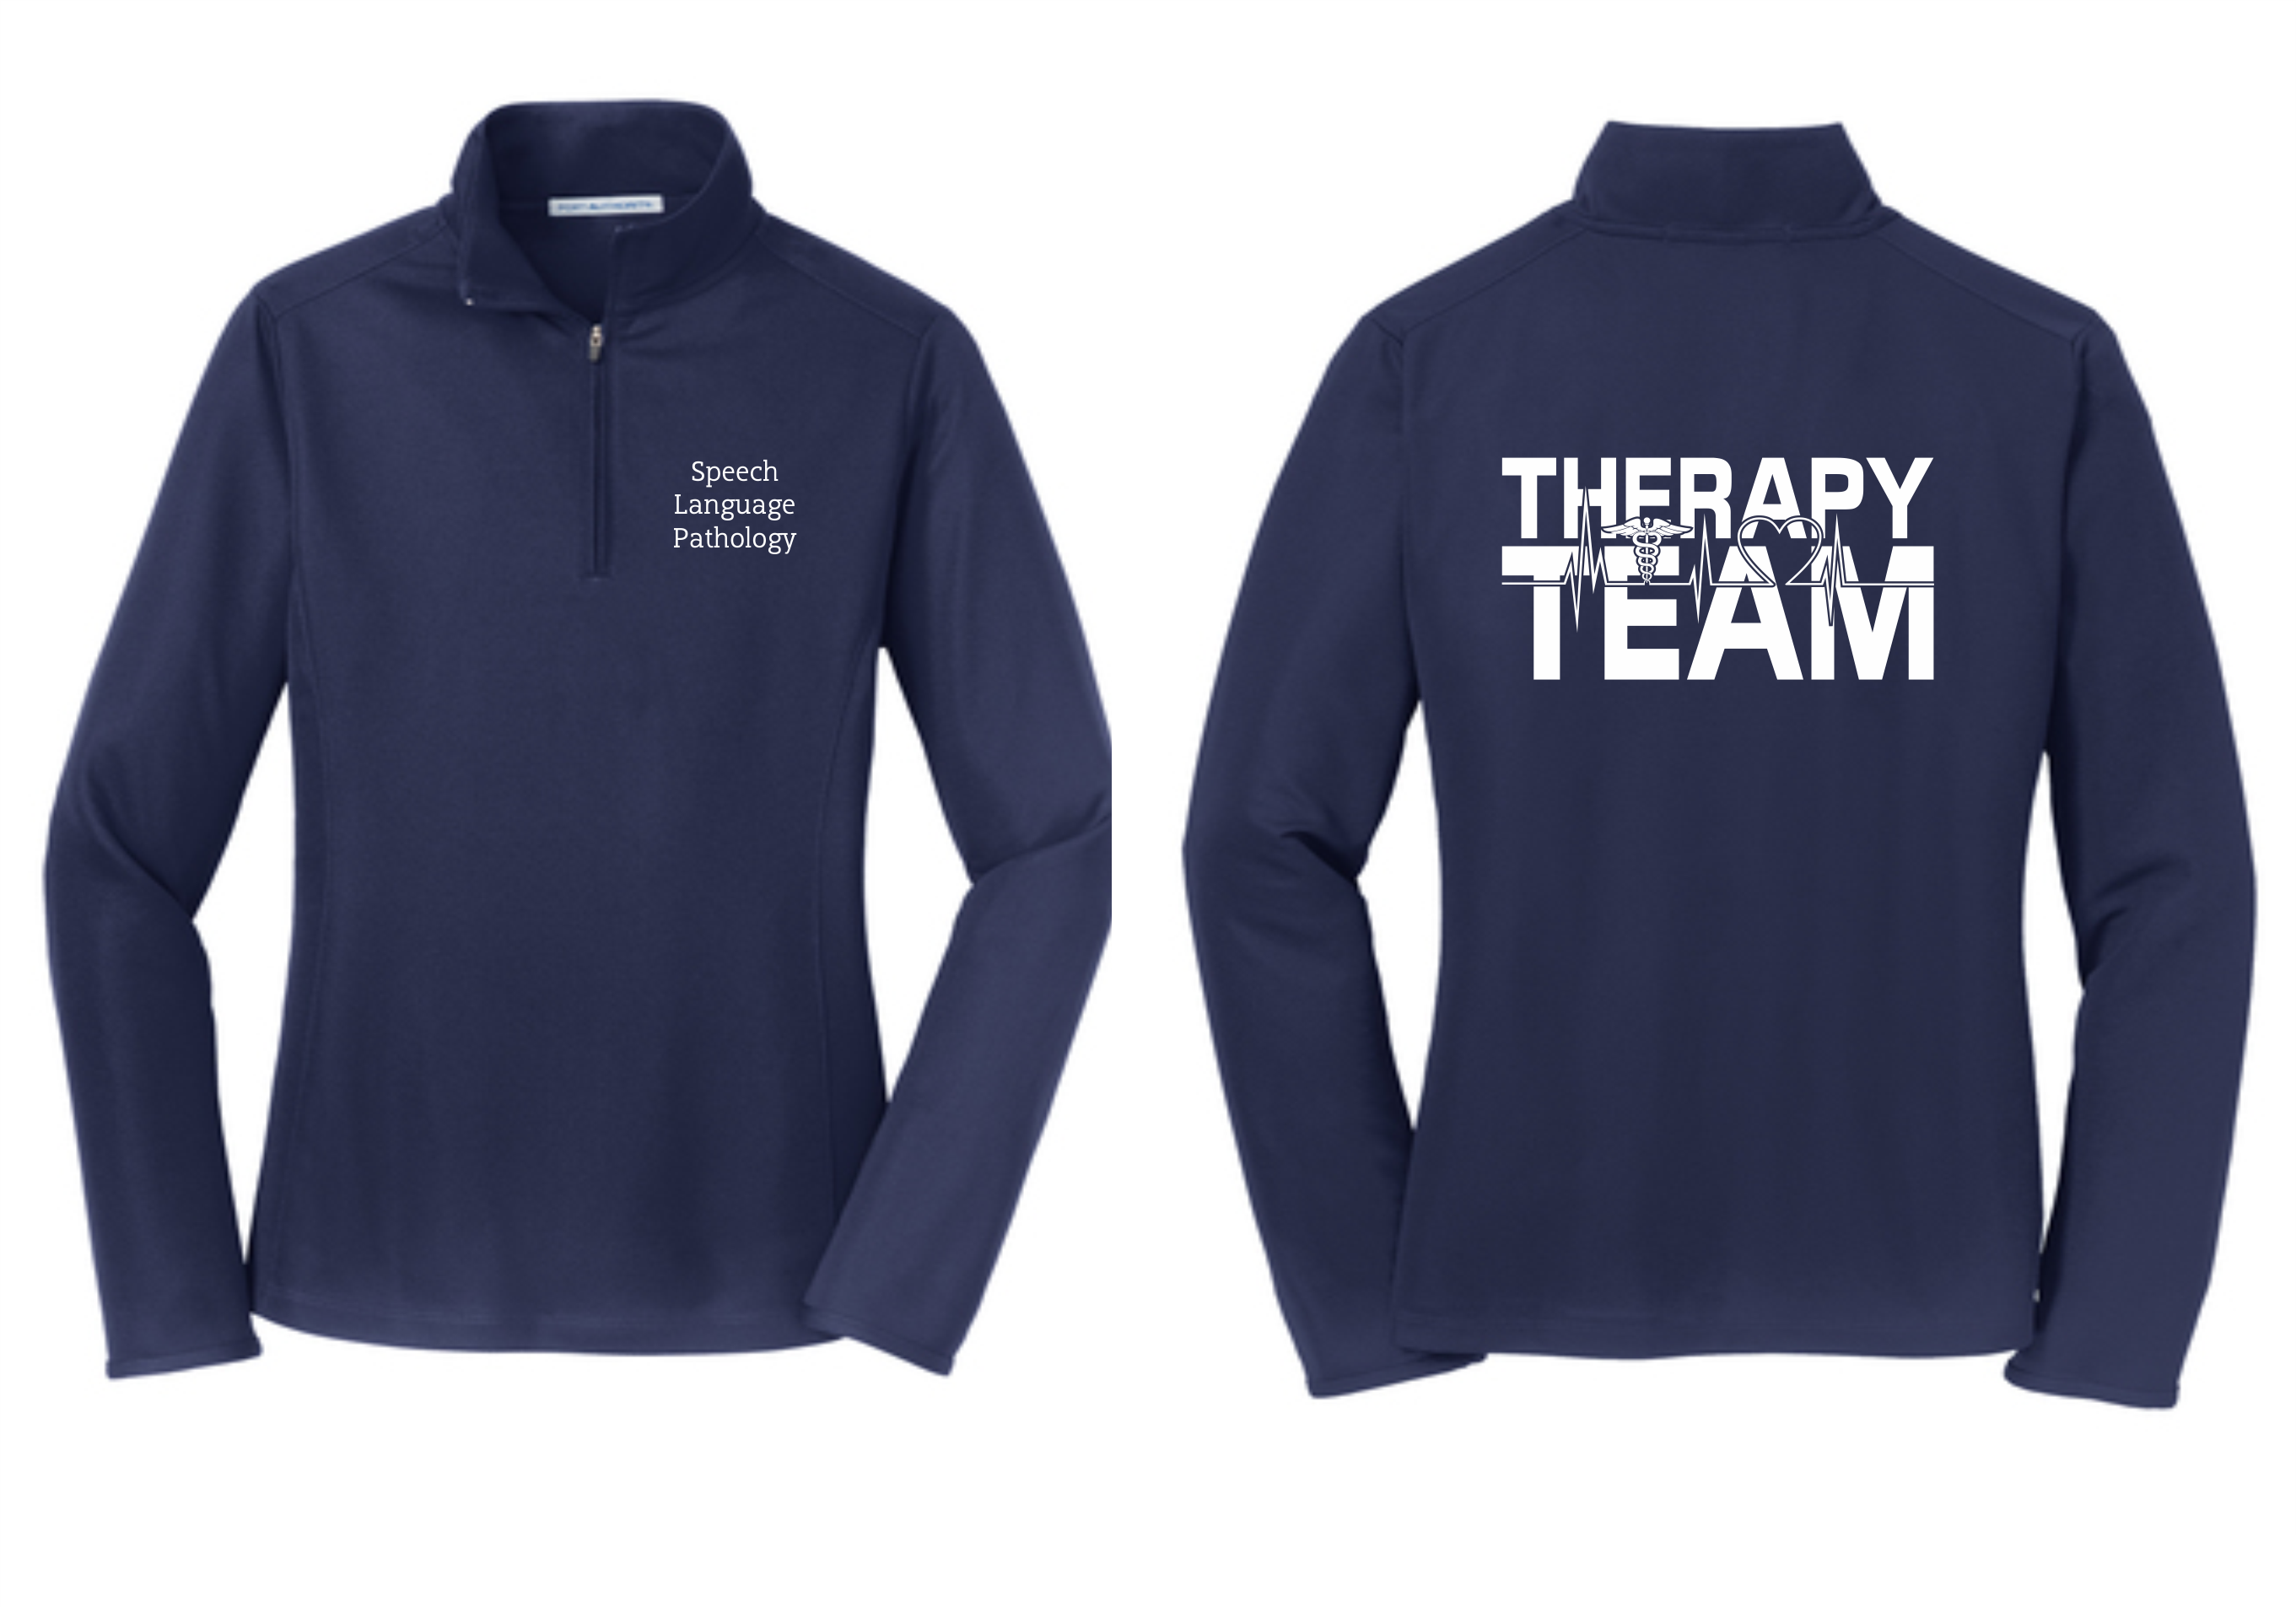 PHW - Occupational Therapy Team - Pinpoint Mesh 1/2 Zip